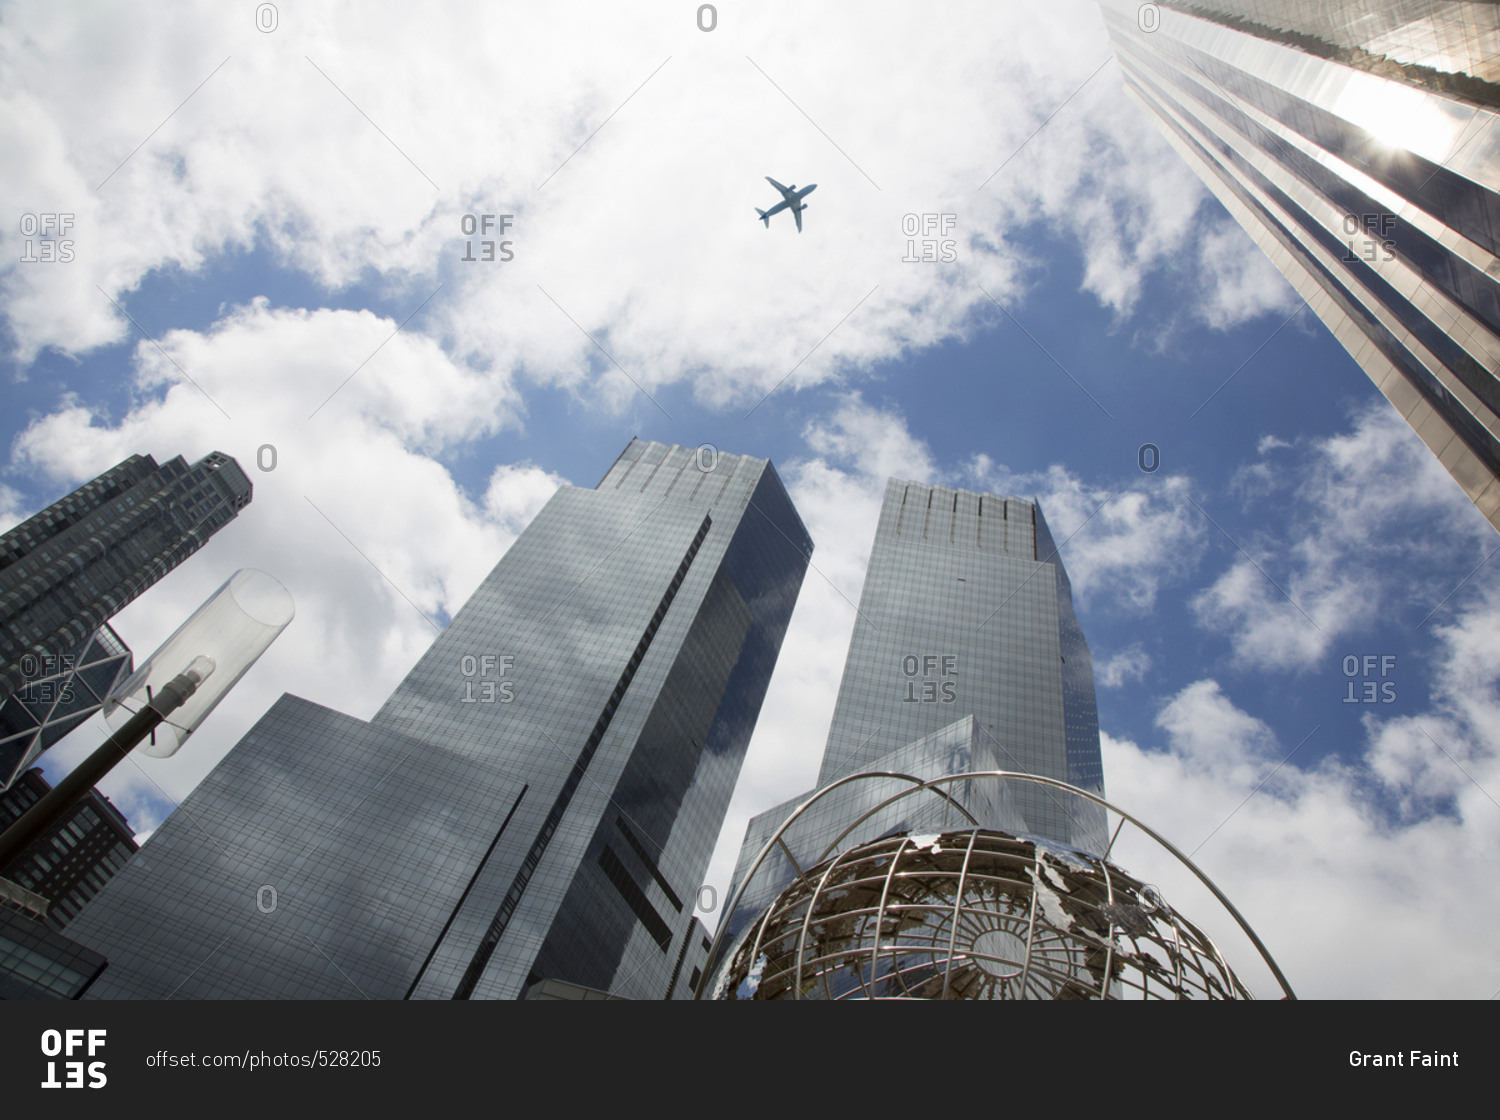 Low angle view of plane flying over the Columbus circle buildings